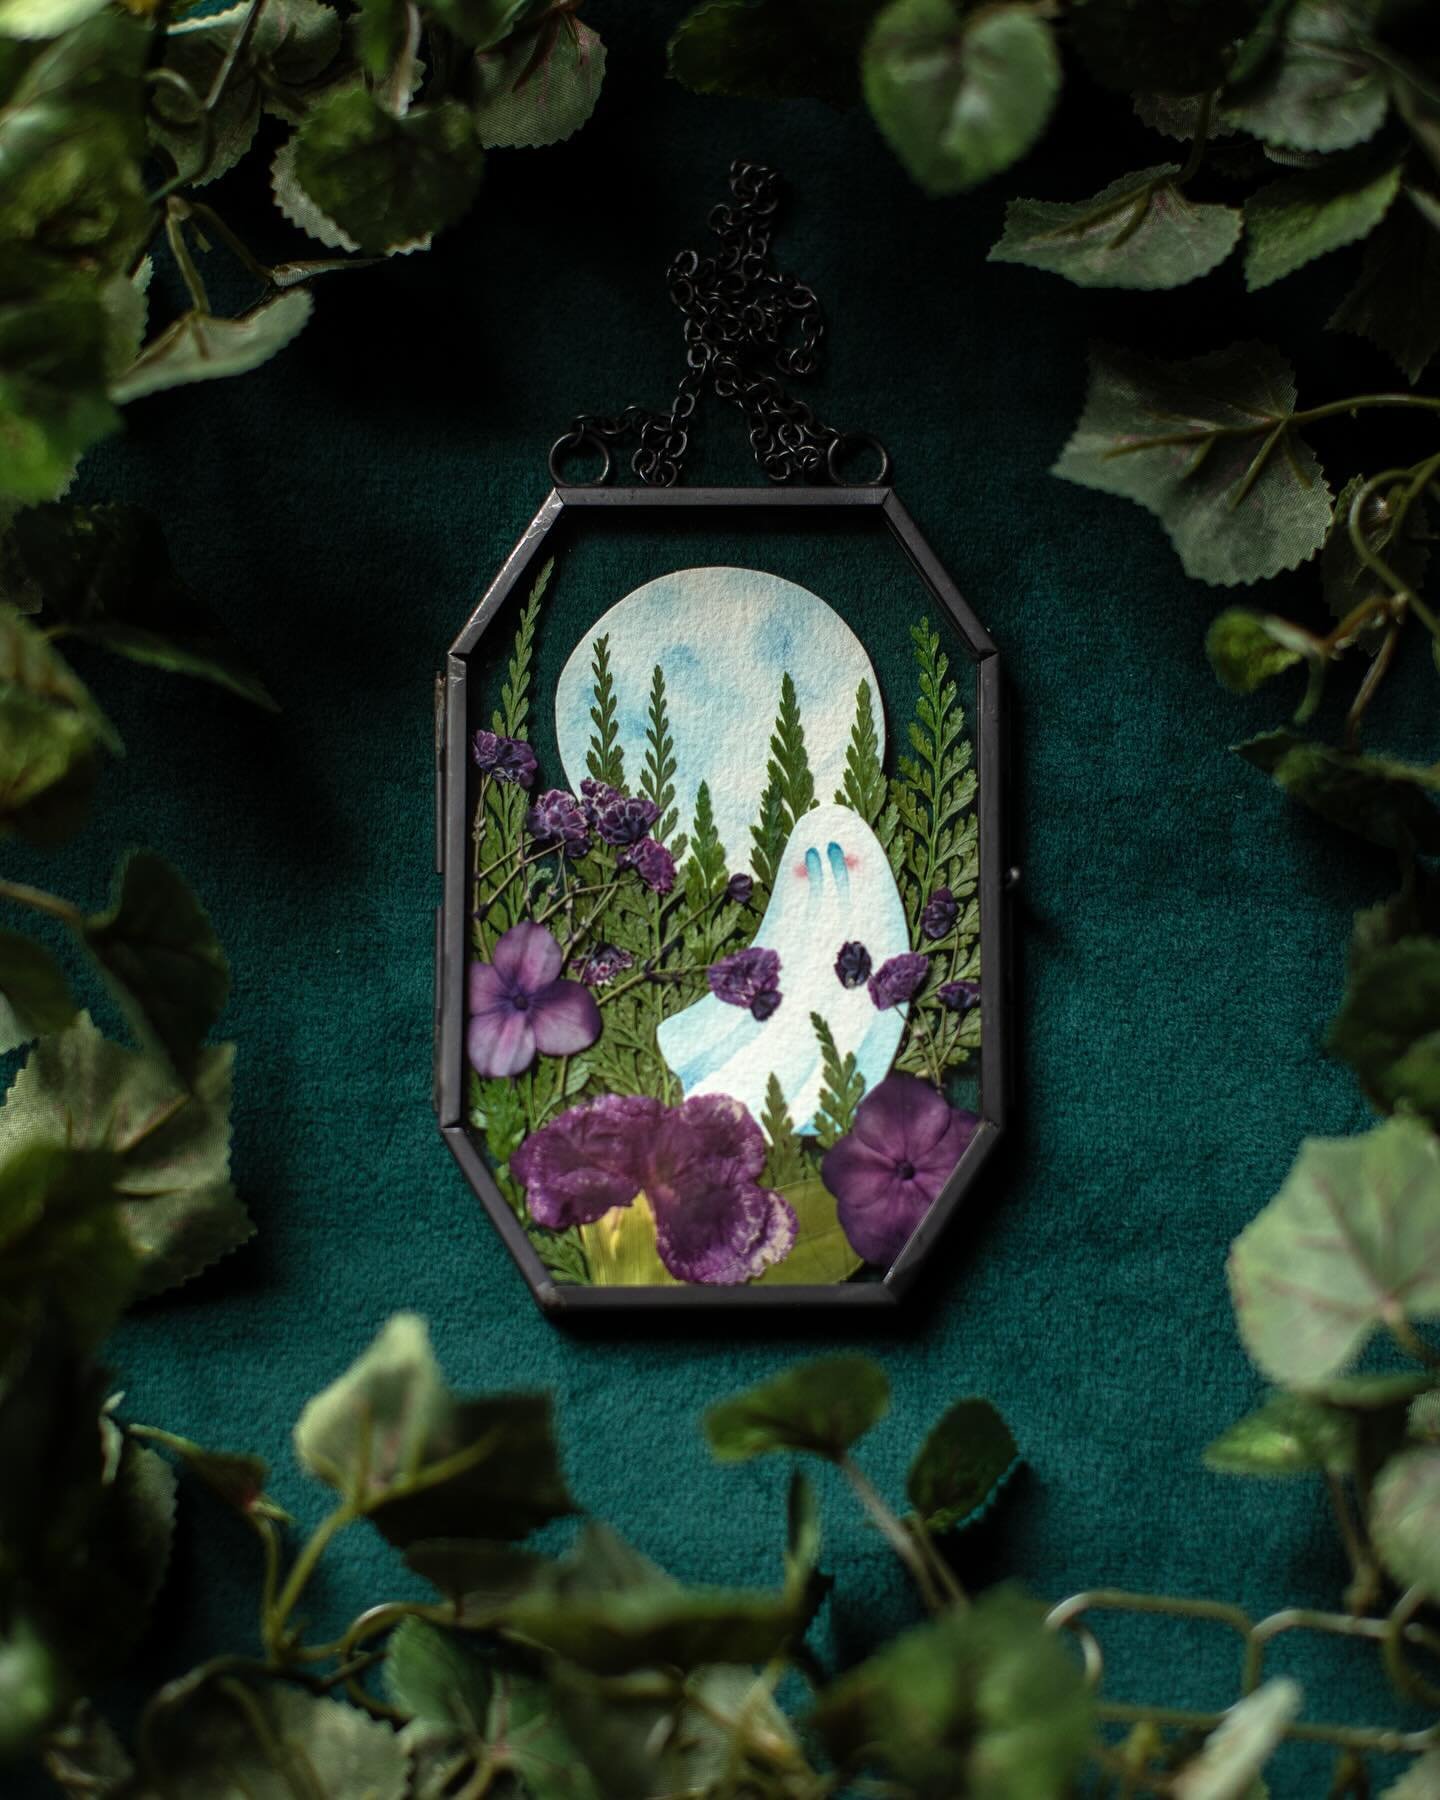 I have a new obsession. I started playing with new additions and settled on these little moons. I can&rsquo;t get over how the ferns look like pine trees. I&rsquo;m so happy with this effect. There&rsquo;s something so sweet about a little ghost danc